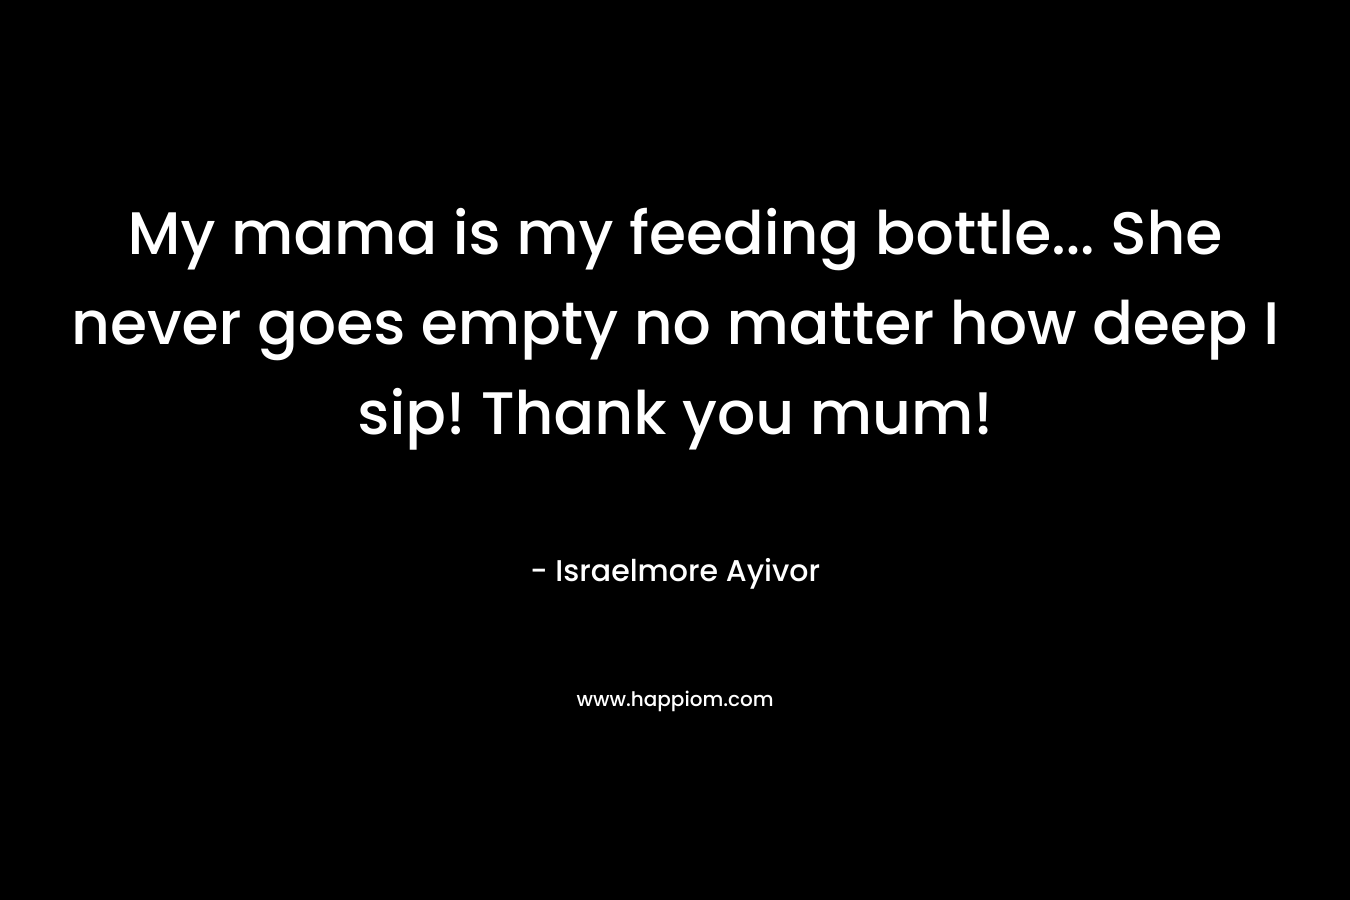 My mama is my feeding bottle… She never goes empty no matter how deep I sip! Thank you mum! – Israelmore Ayivor